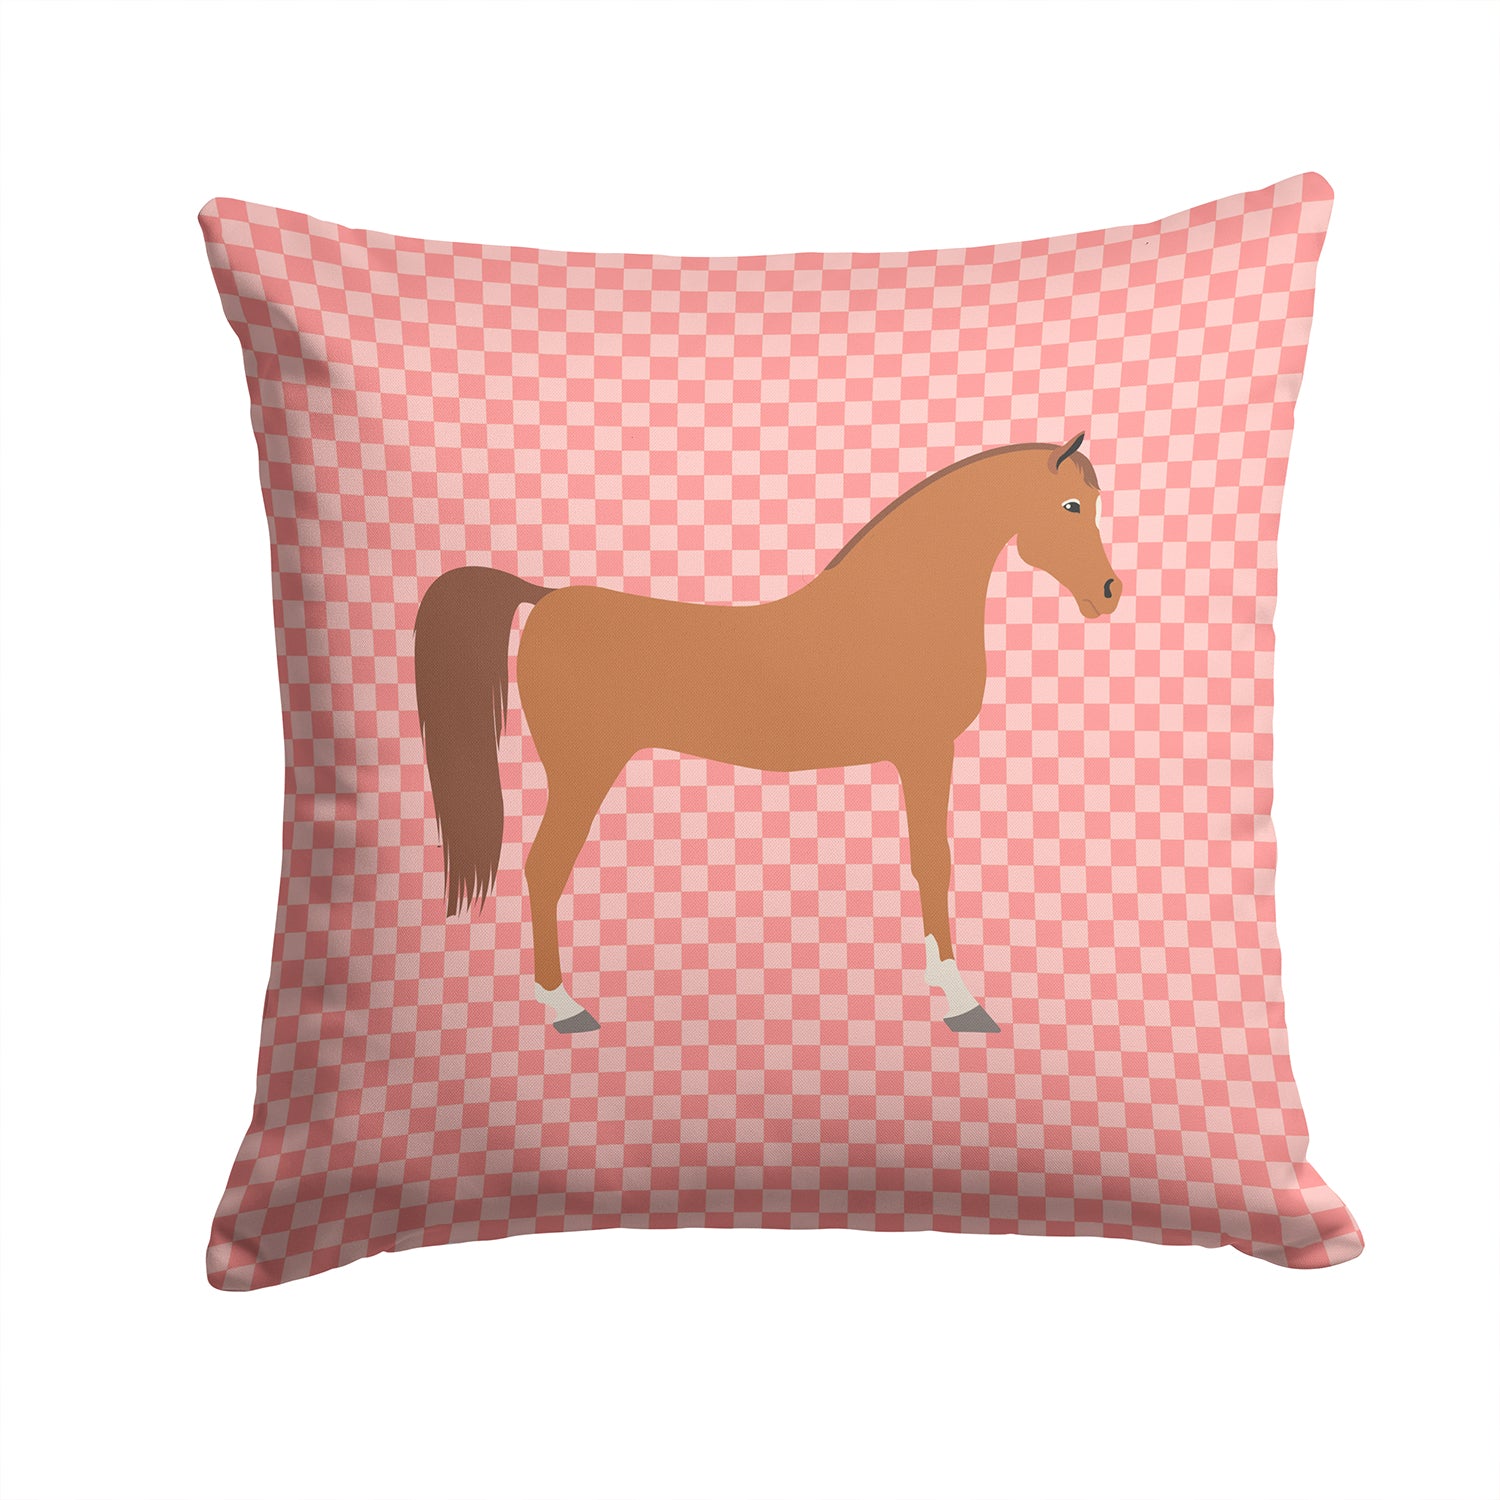 Arabian Horse Pink Check Fabric Decorative Pillow BB7911PW1414 - the-store.com